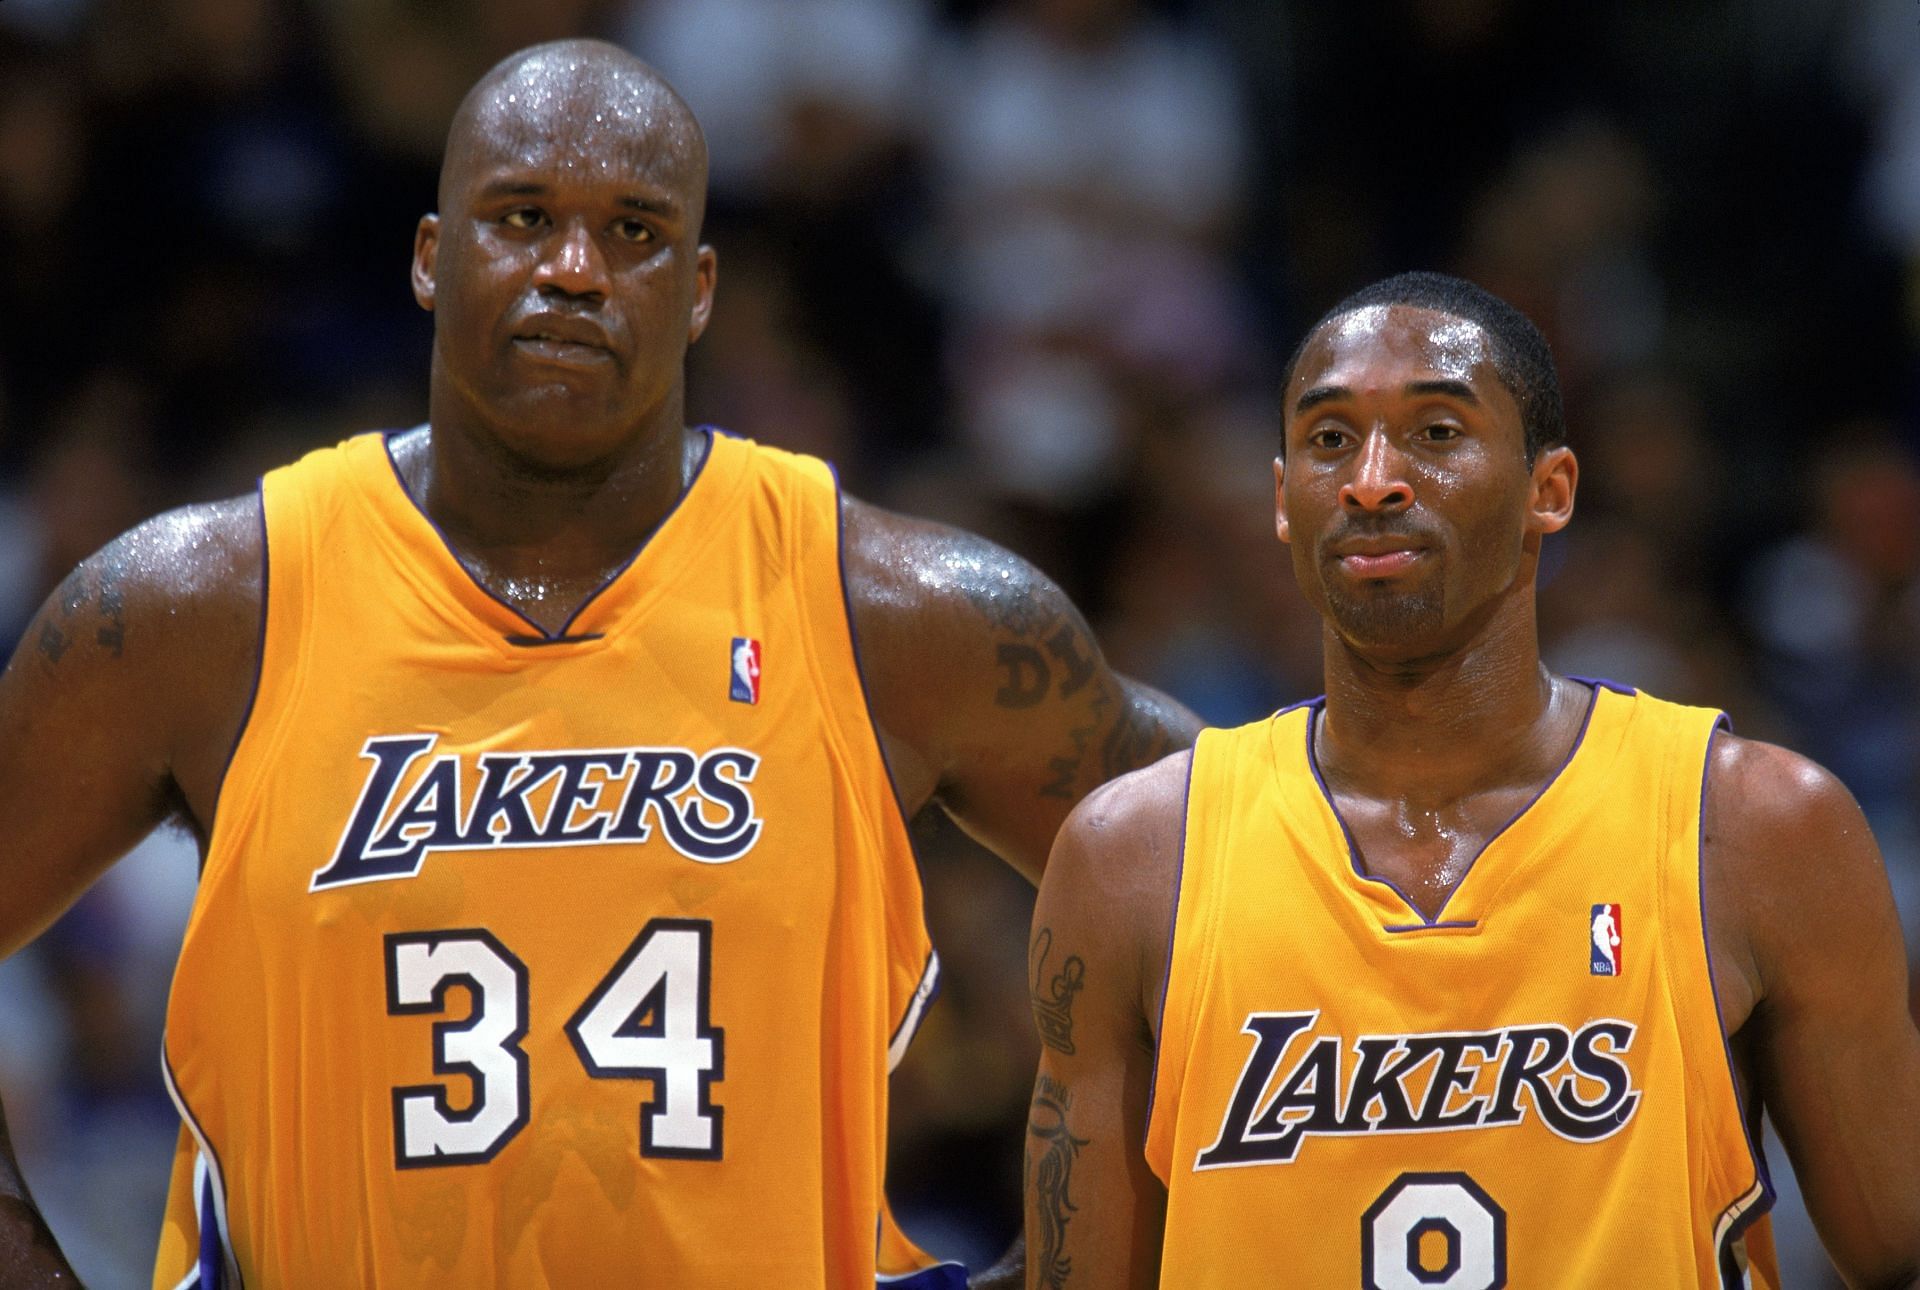 Los Angeles Lakers superstars Shaquille O